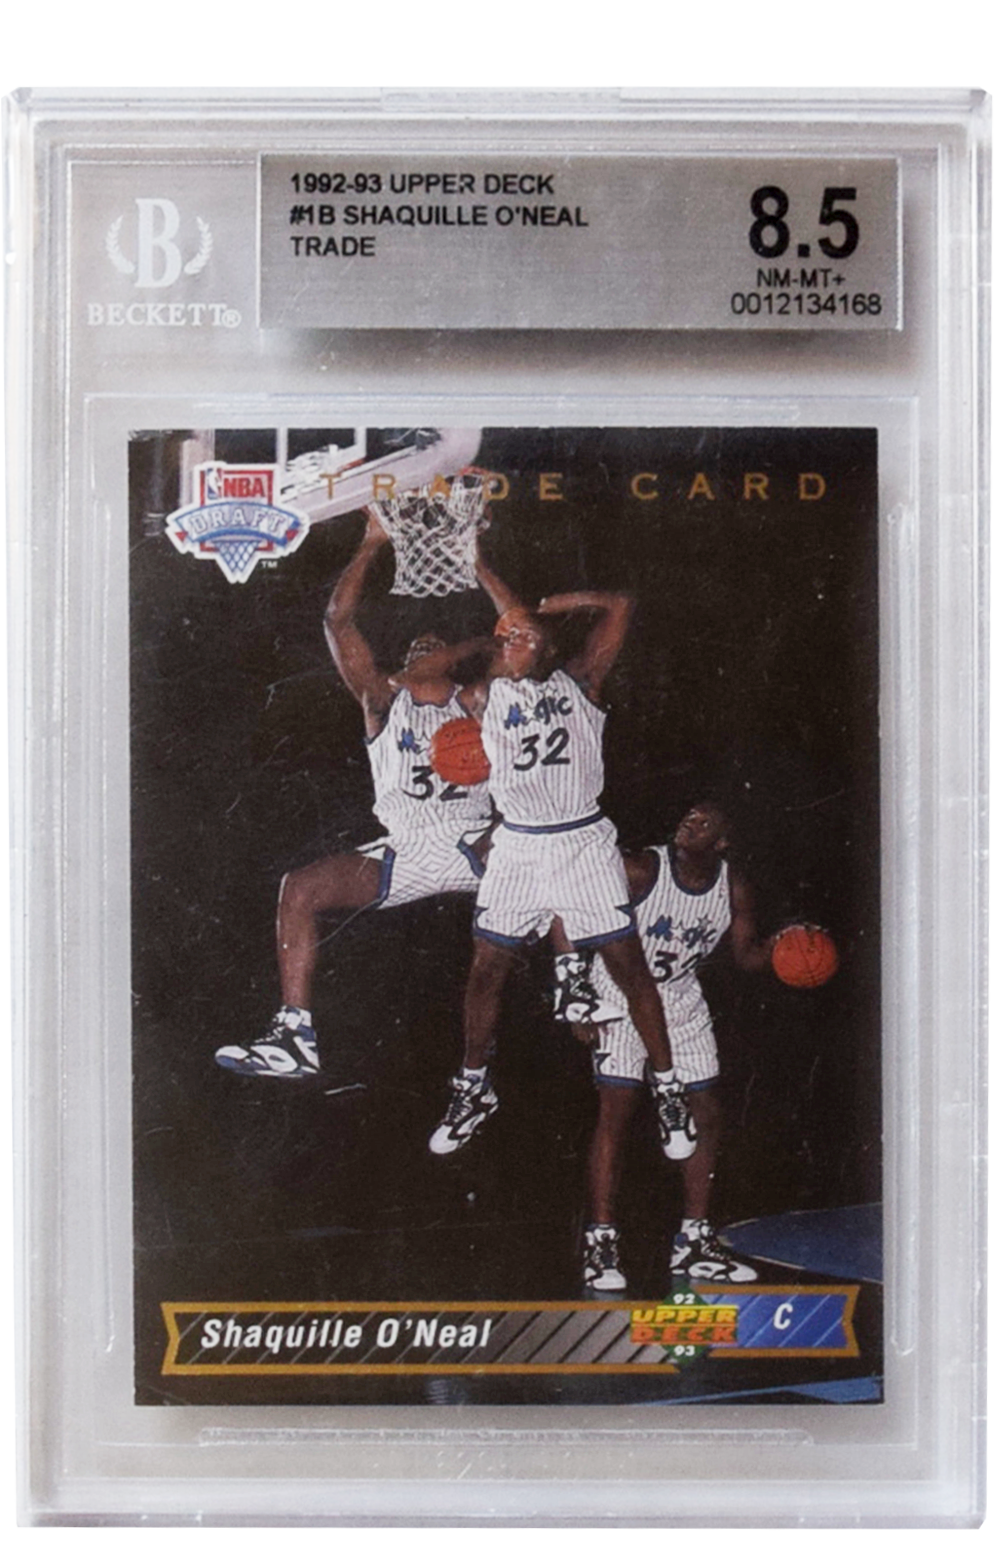 1992-93 Upper Deck - Trade - #1B Shaquille O'Neal BGS 8.5 NM-MT+